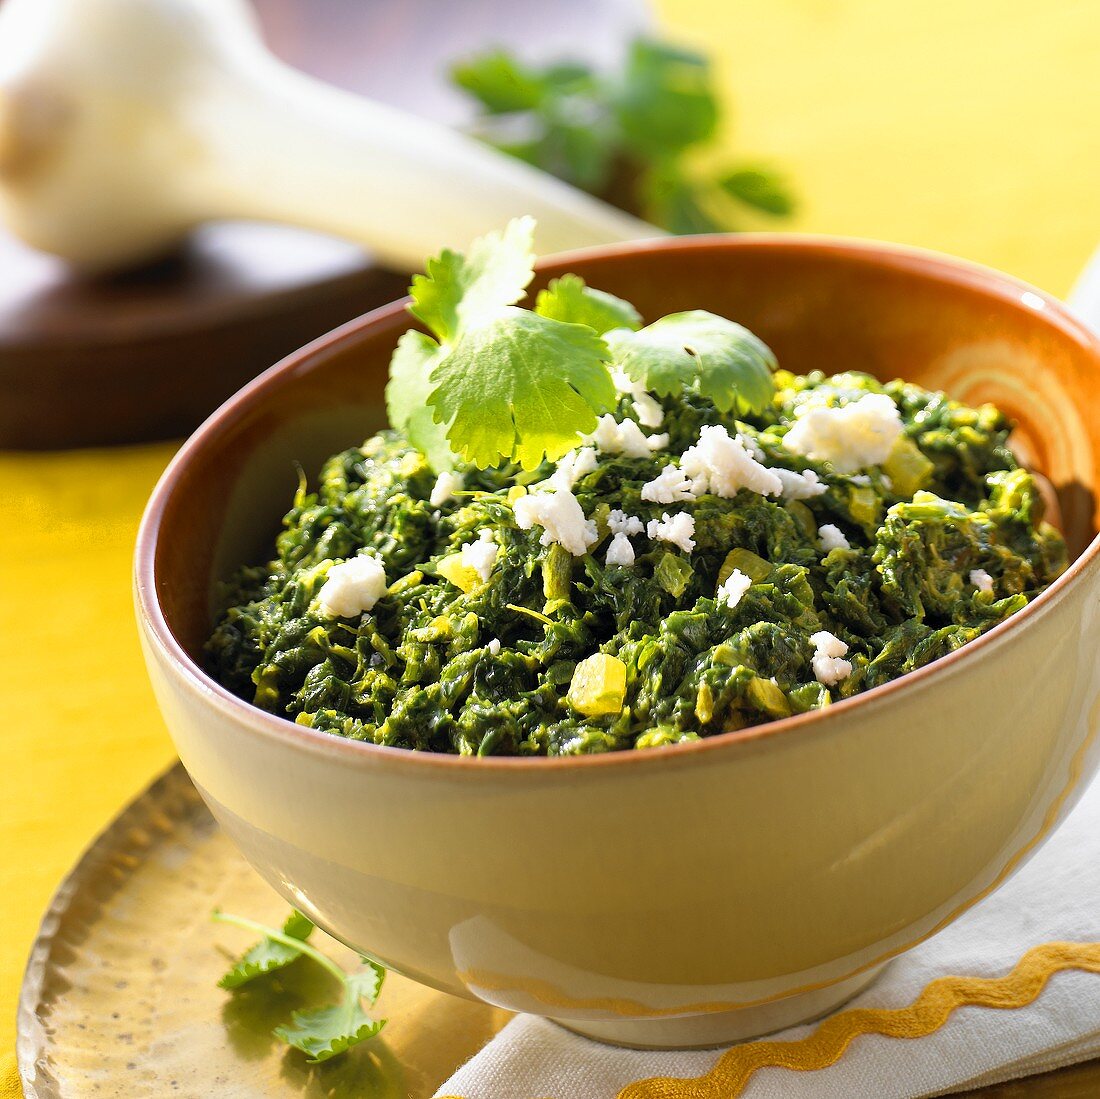 Spinach in a bowl, sprinkled with sheep's cheese (India)